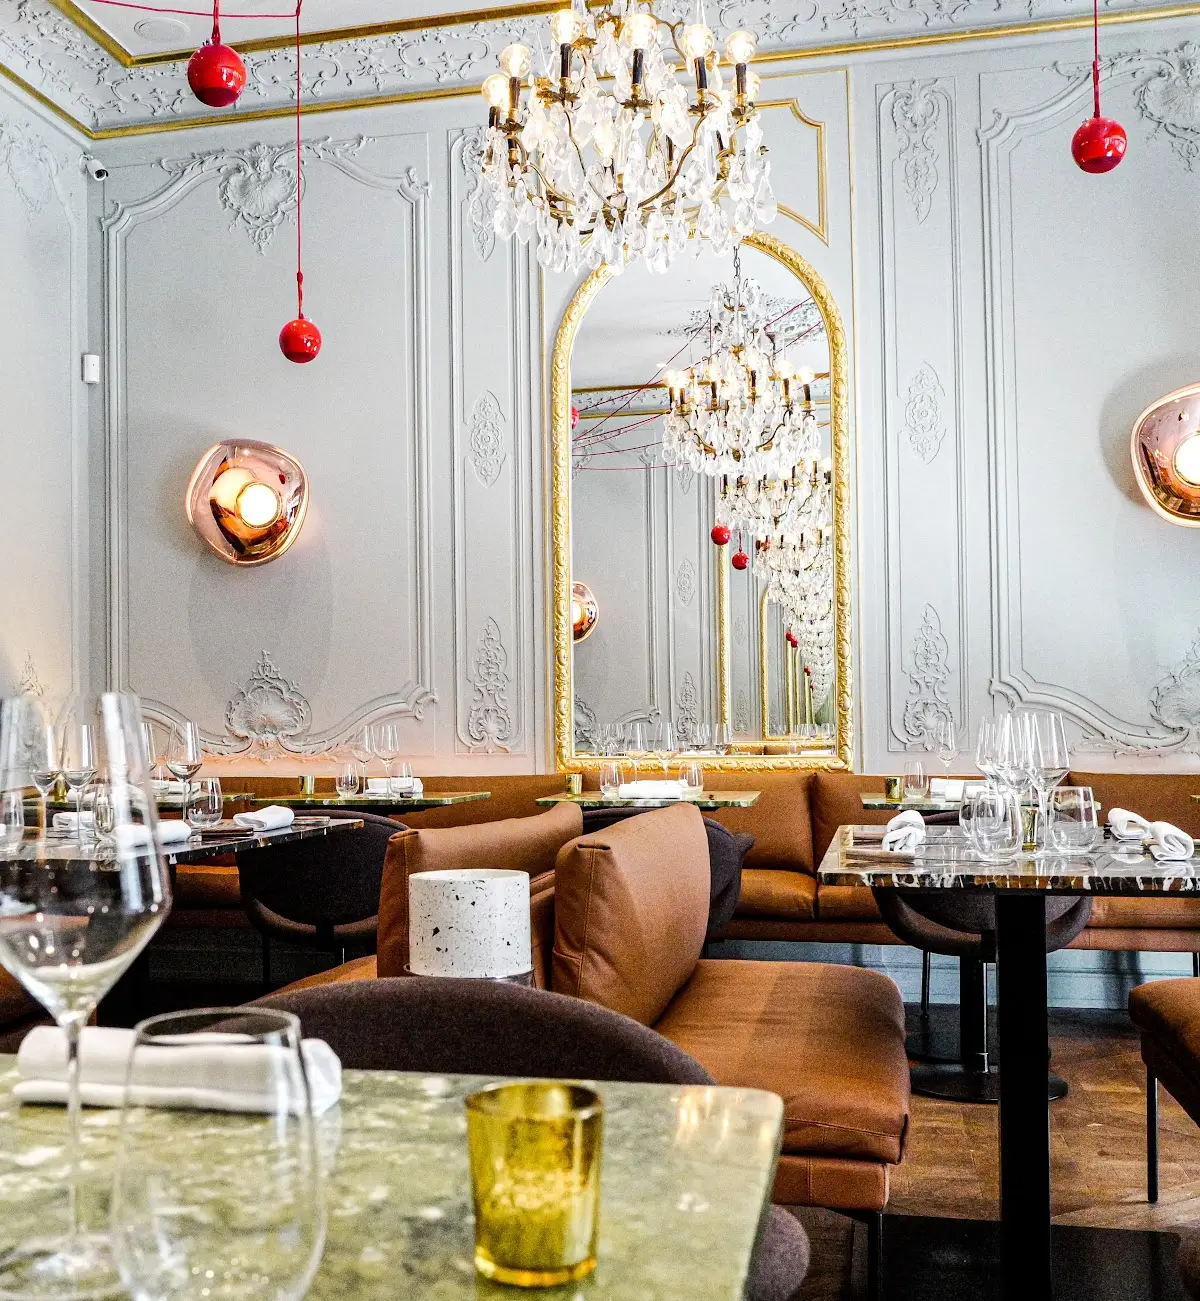 Elegant dining room with chandeliers and mirrored walls at Contraste, a Michelin Star restaurant in Paris.